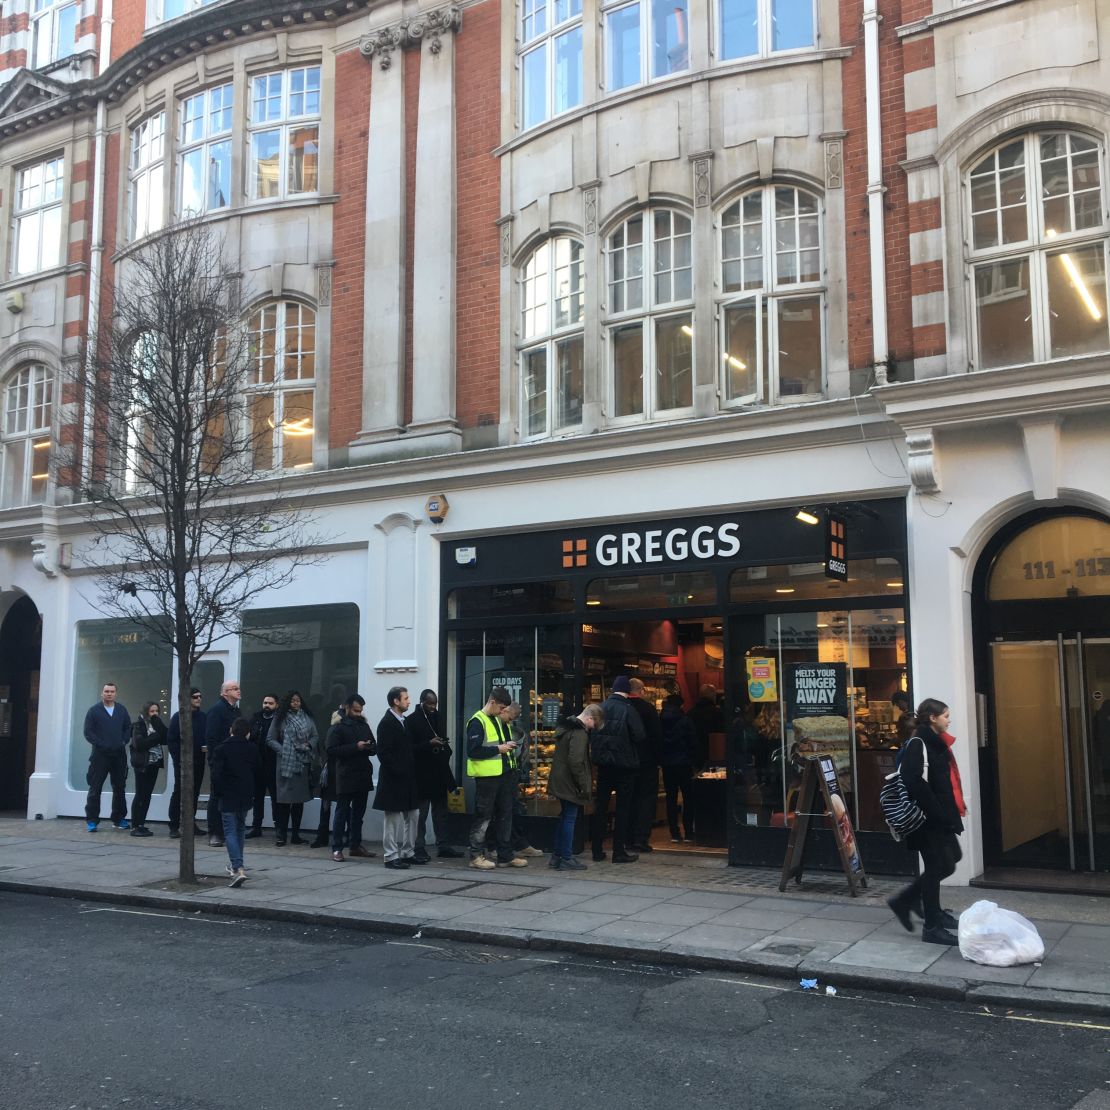 Customers queue outside a London Greggs at lunchtime.